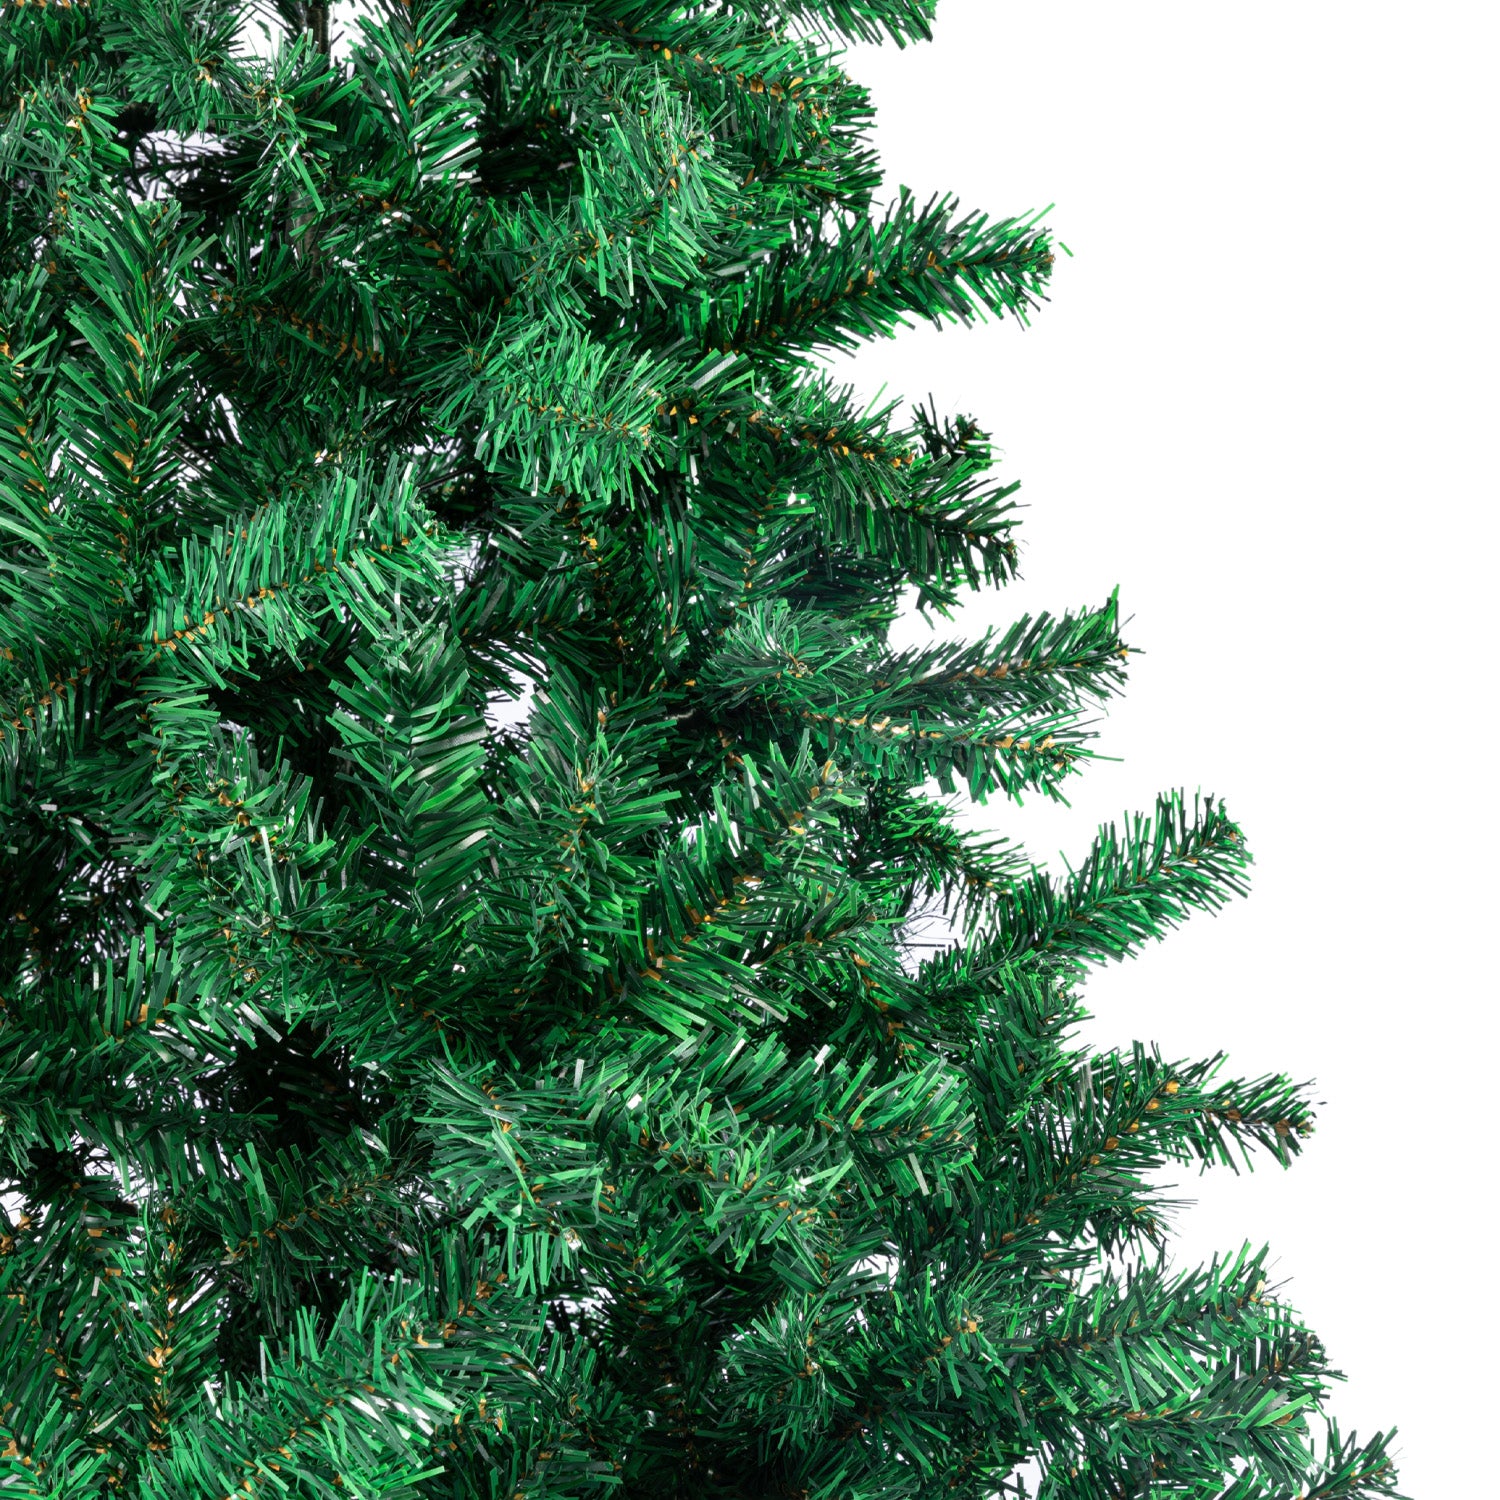 Christabelle Green Christmas Tree 2.4m Xmas Decor Decorations - 1500 Tips - SILBERSHELL